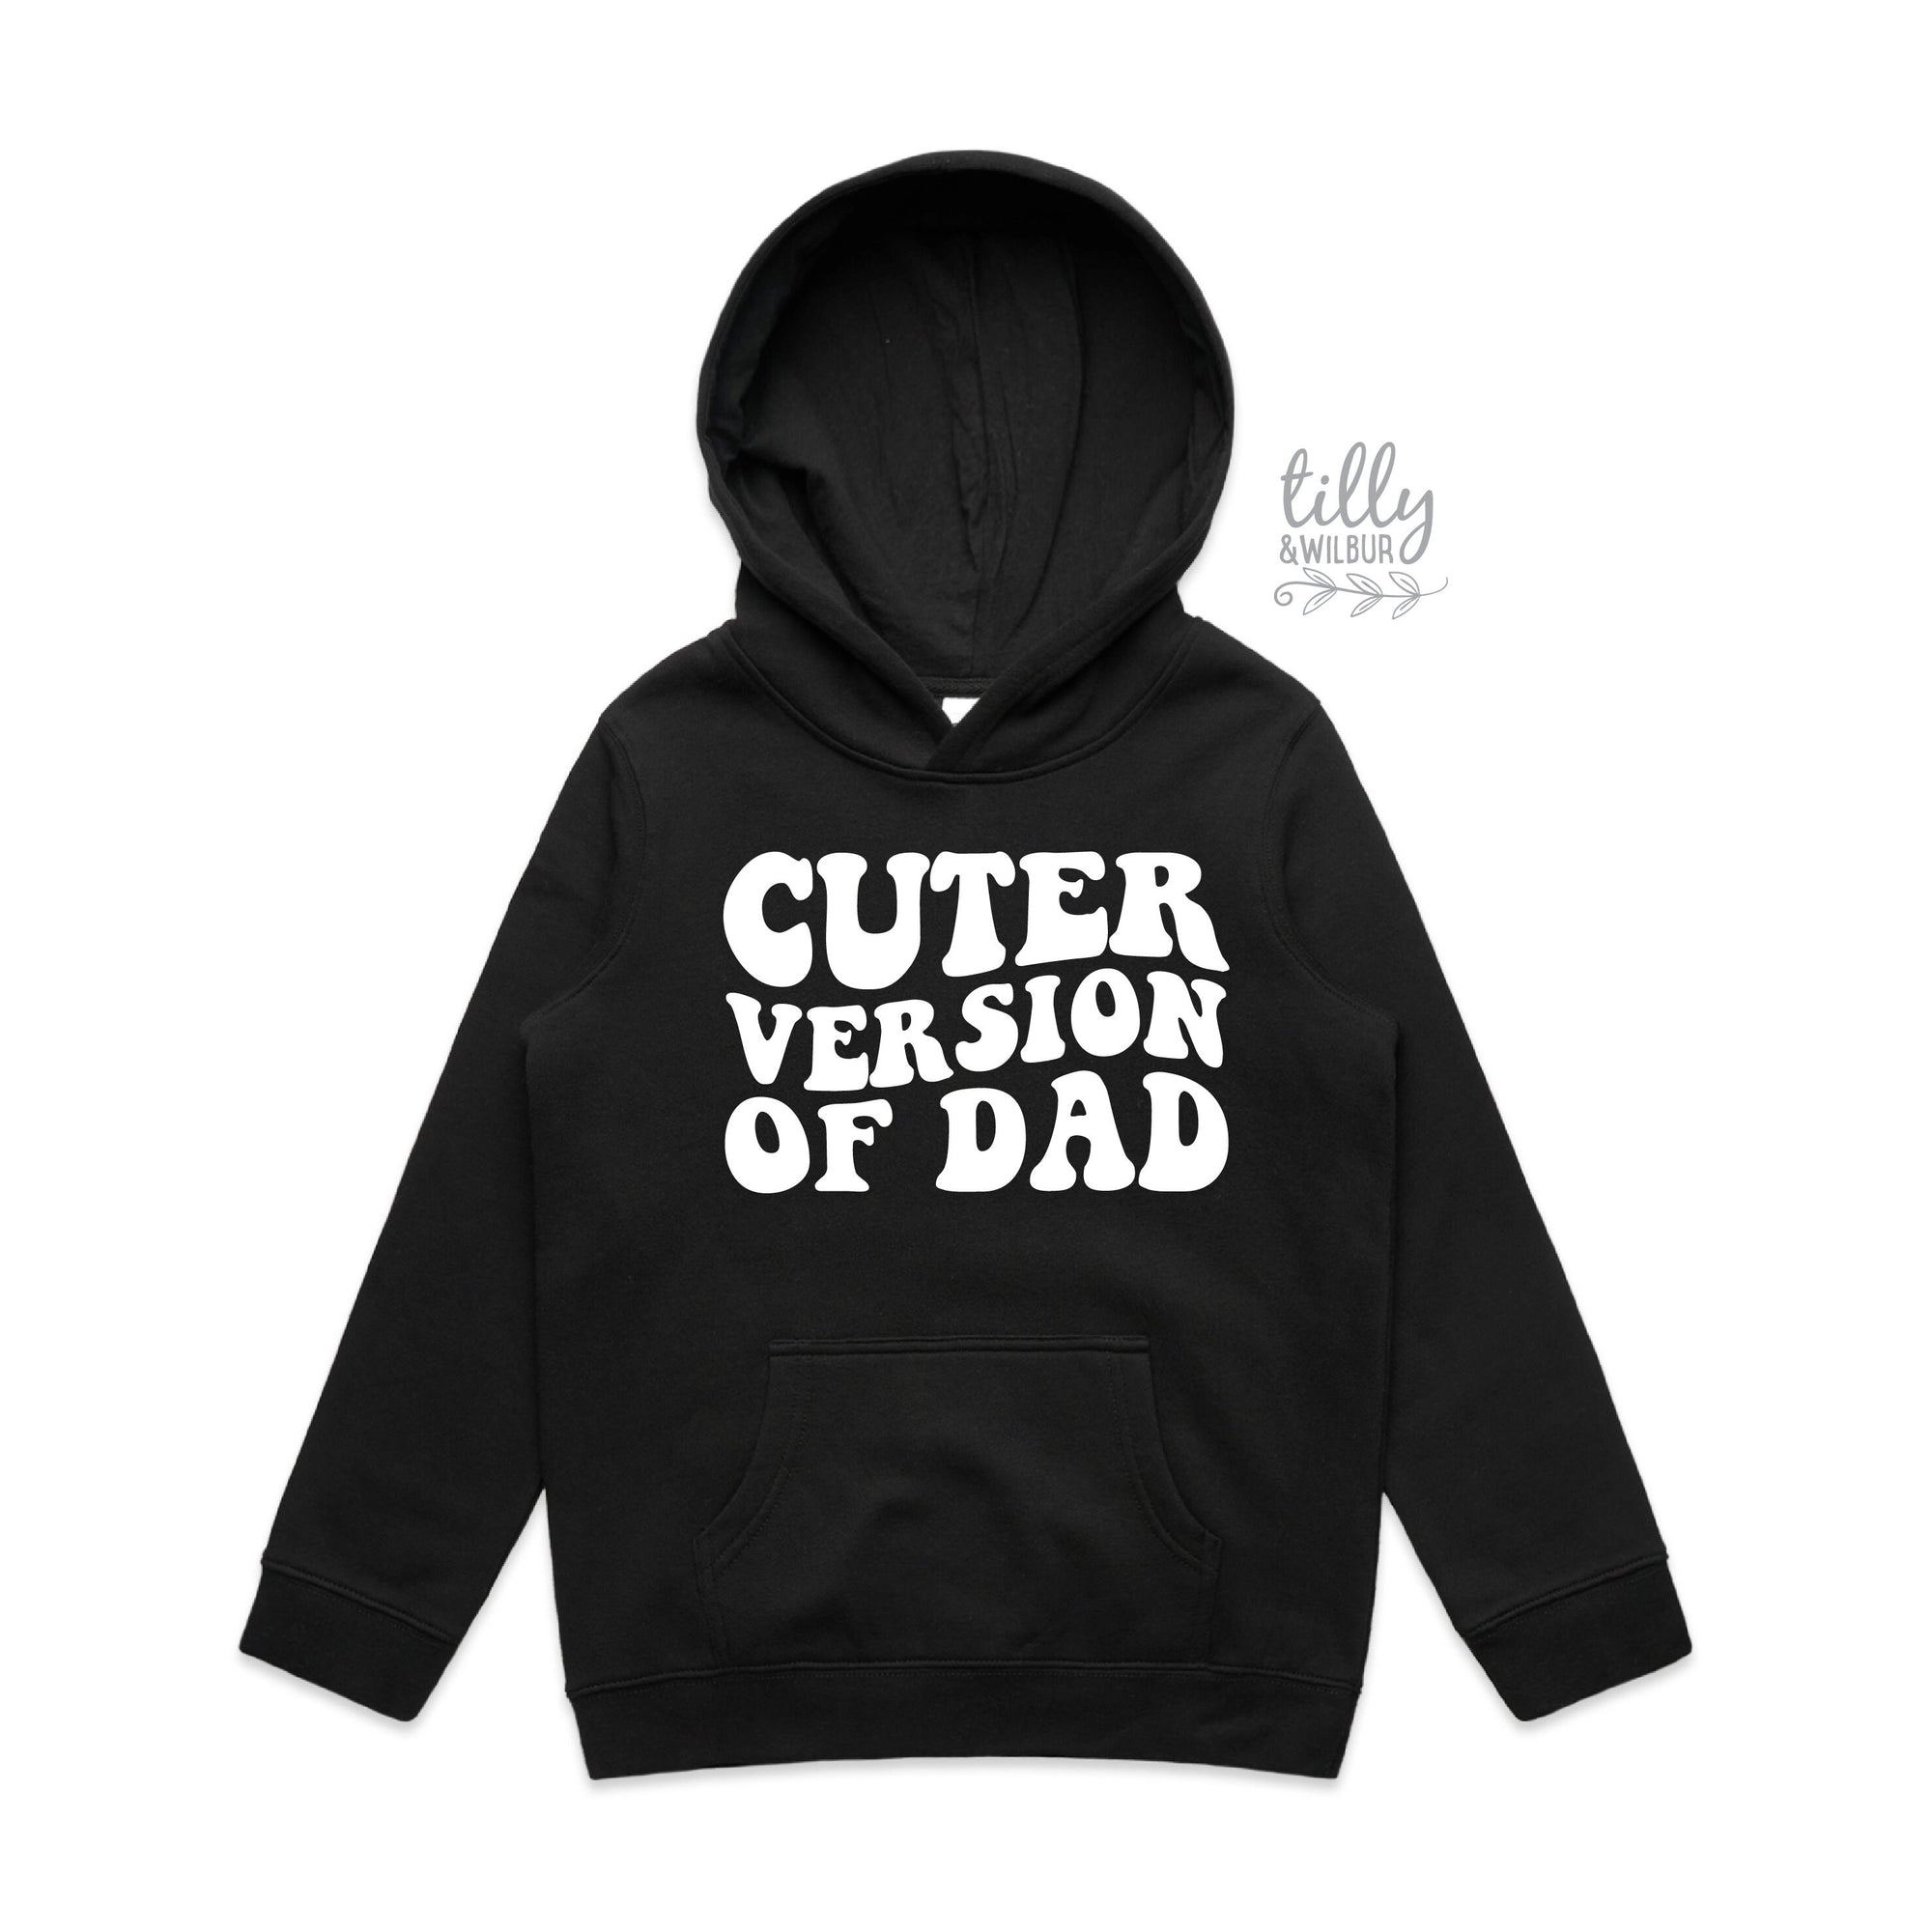 Cuter Version of Dad, Sweatshirt, Kids Outfit, Fathers Day Gift, Funny Dad, Kid's clothing, Jumper, Cute kids, Cuter Than Dad Jumper